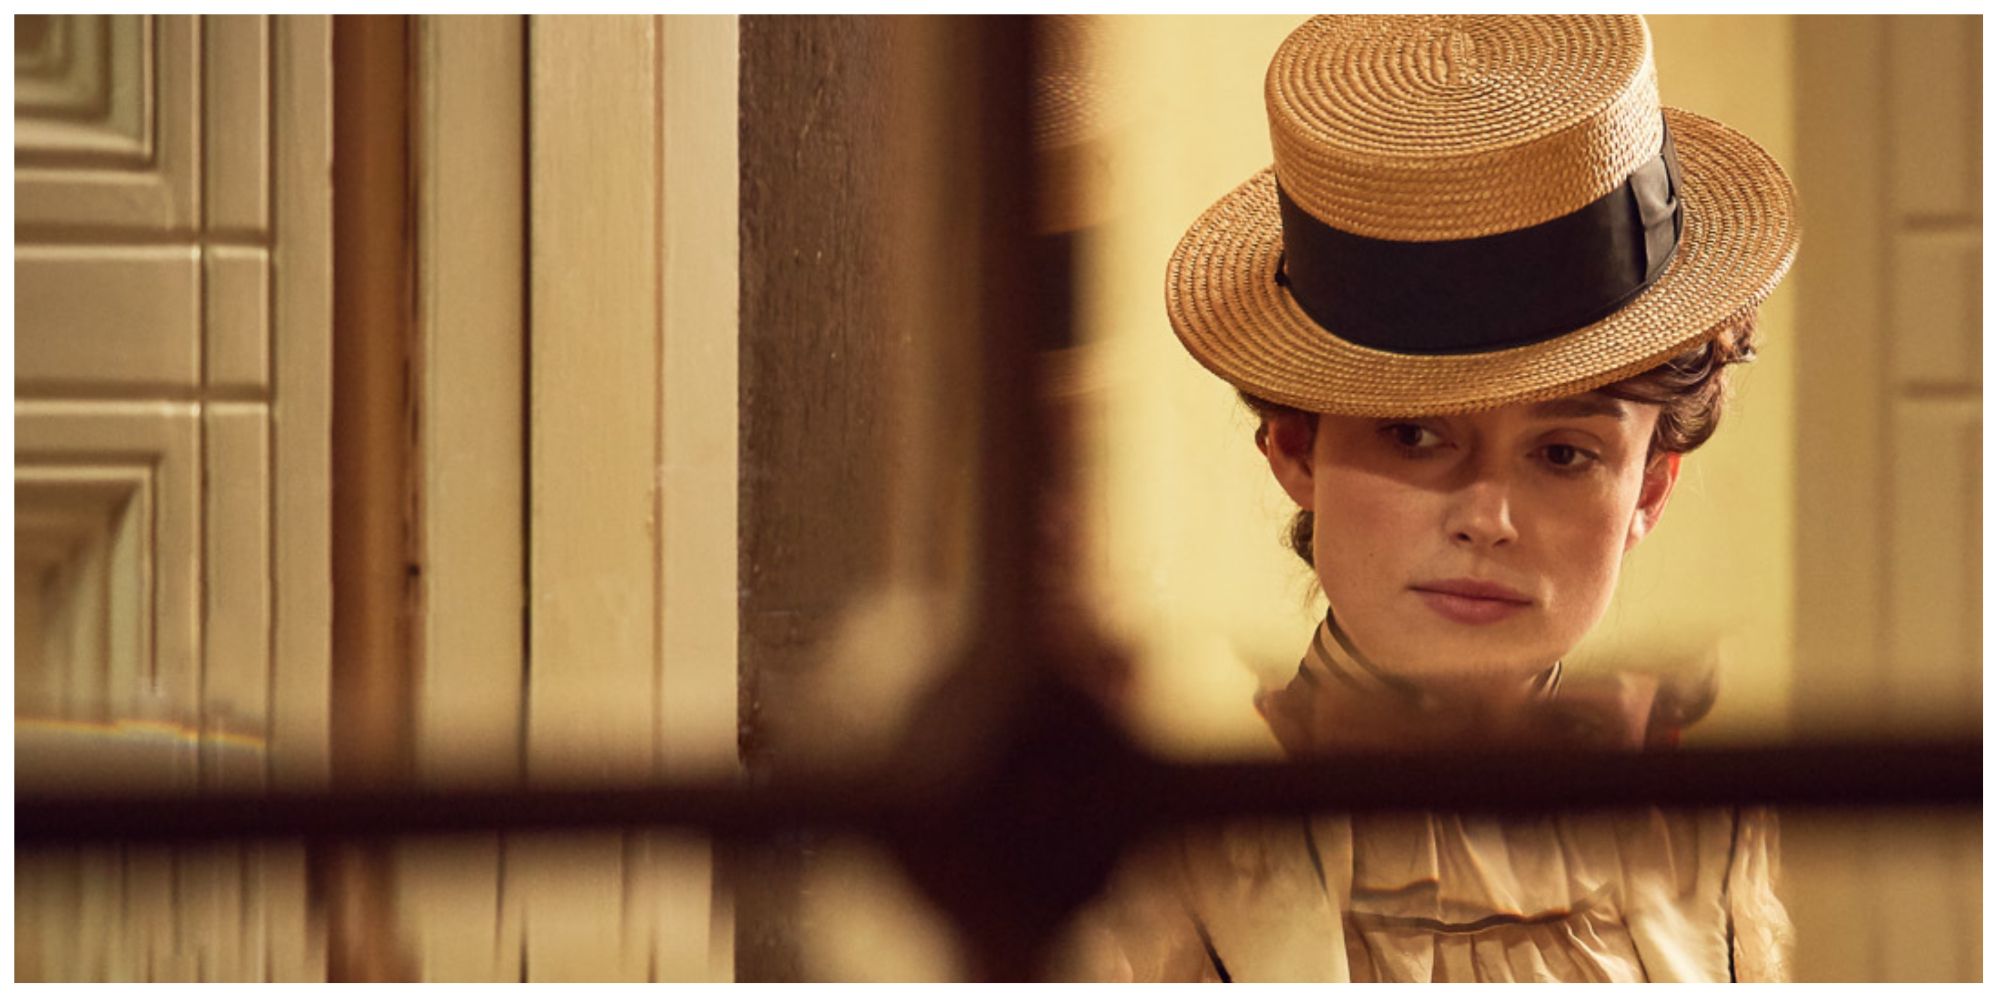 Keira Knightley as Colette looking through a window pensively 